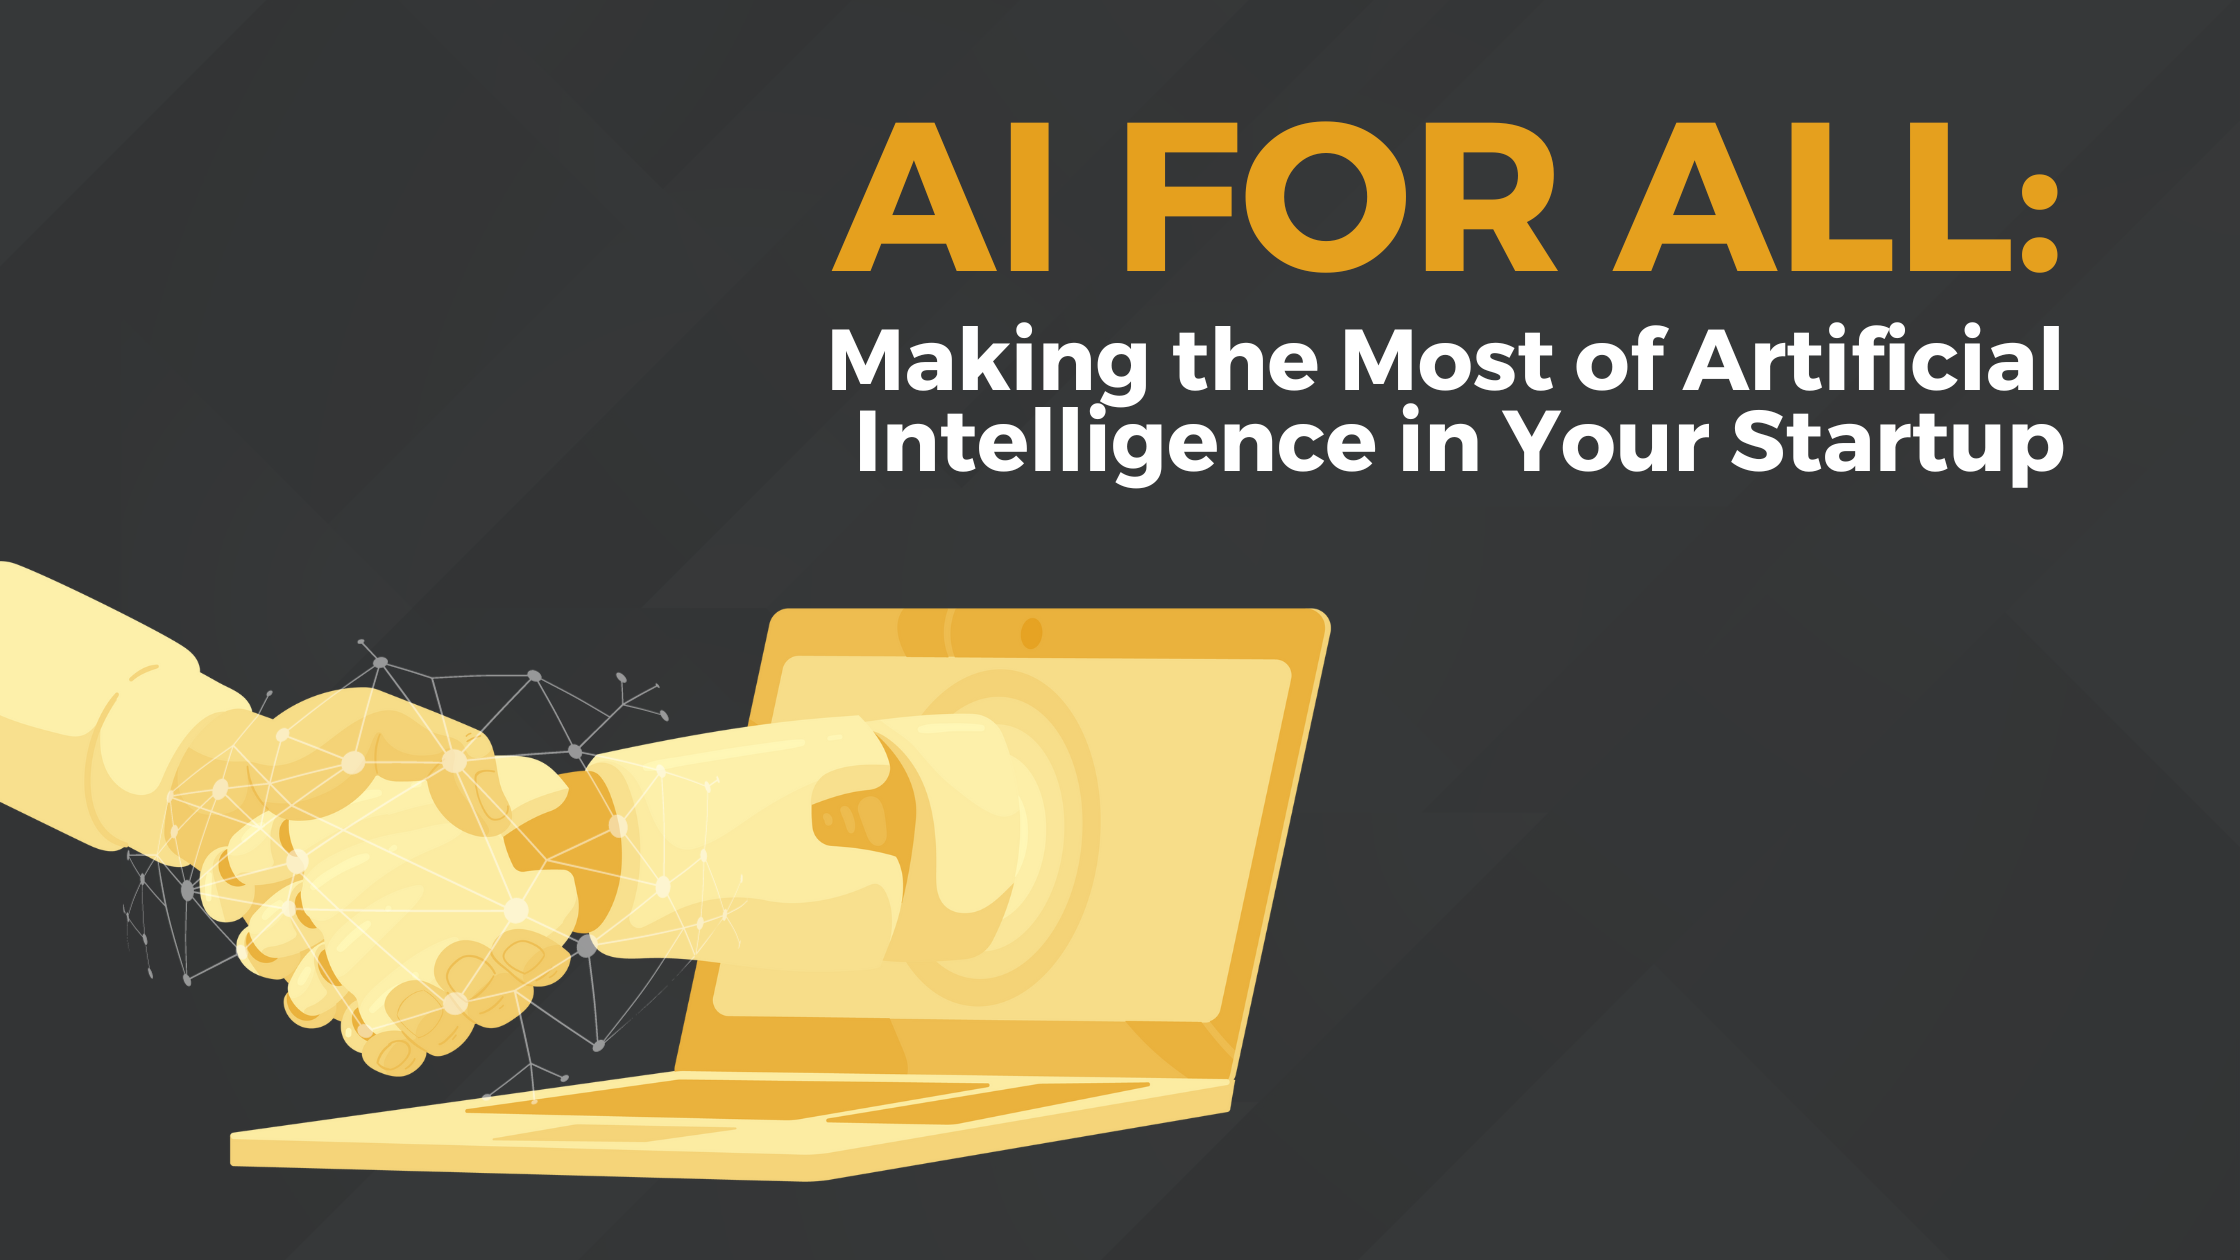 AI for All: Making the Most of Artificial Intelligence in Your Startup